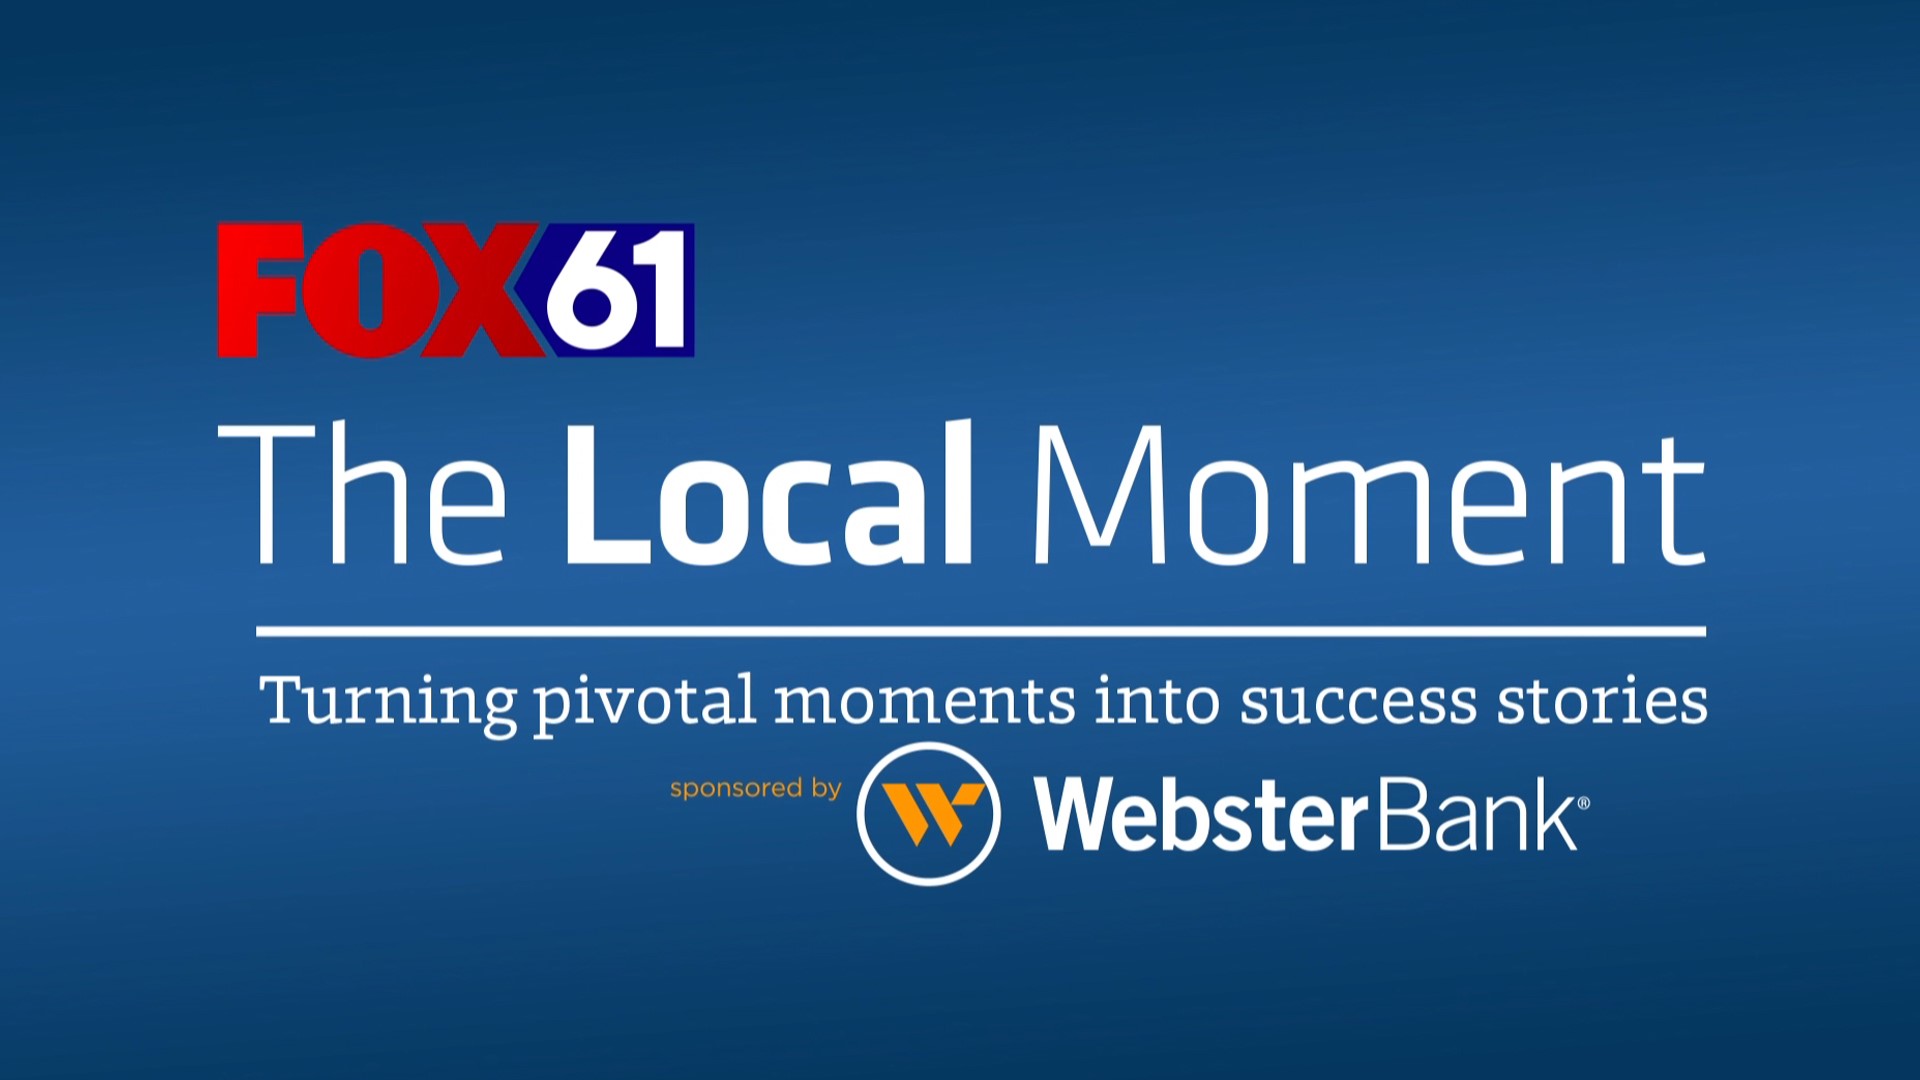 The Local Moment sponsored by Webster Bank talks about refinancing during the covid-19 pandemic.